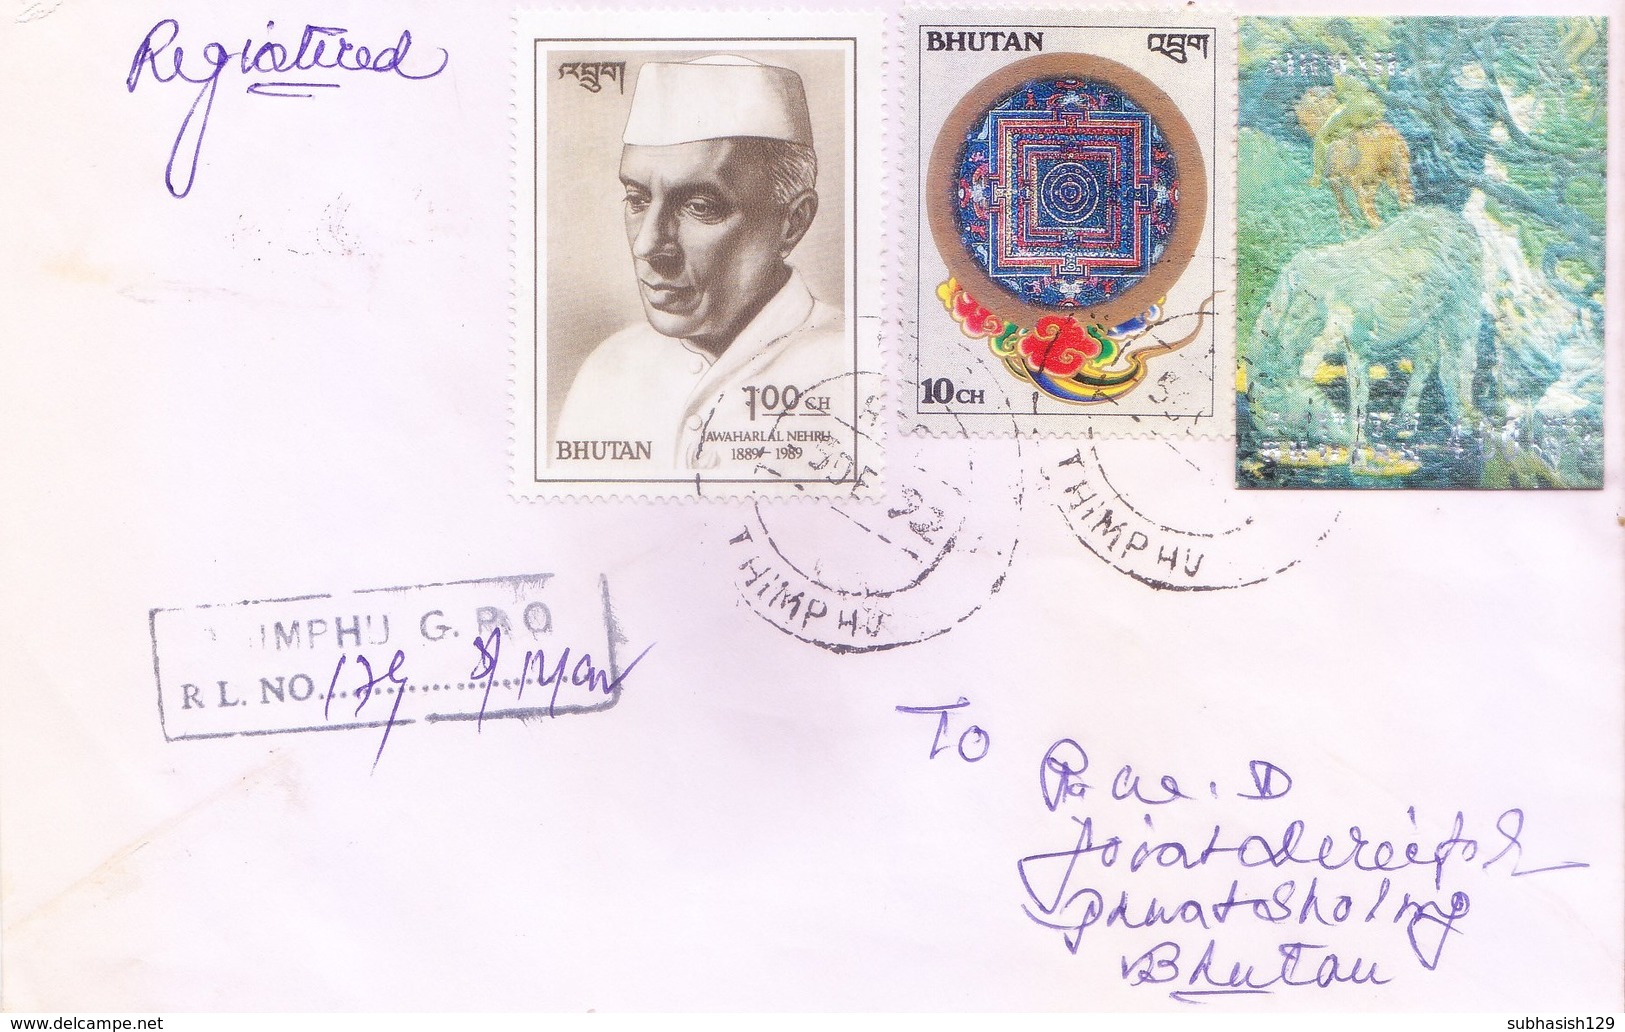 BHUTAN : REGISTERED COMMERCIAL COVER : POSTED FROM THIMPHU : USE OF 3D STAMP, PAINTING, ADDITIONAL STAMPS - Bhután